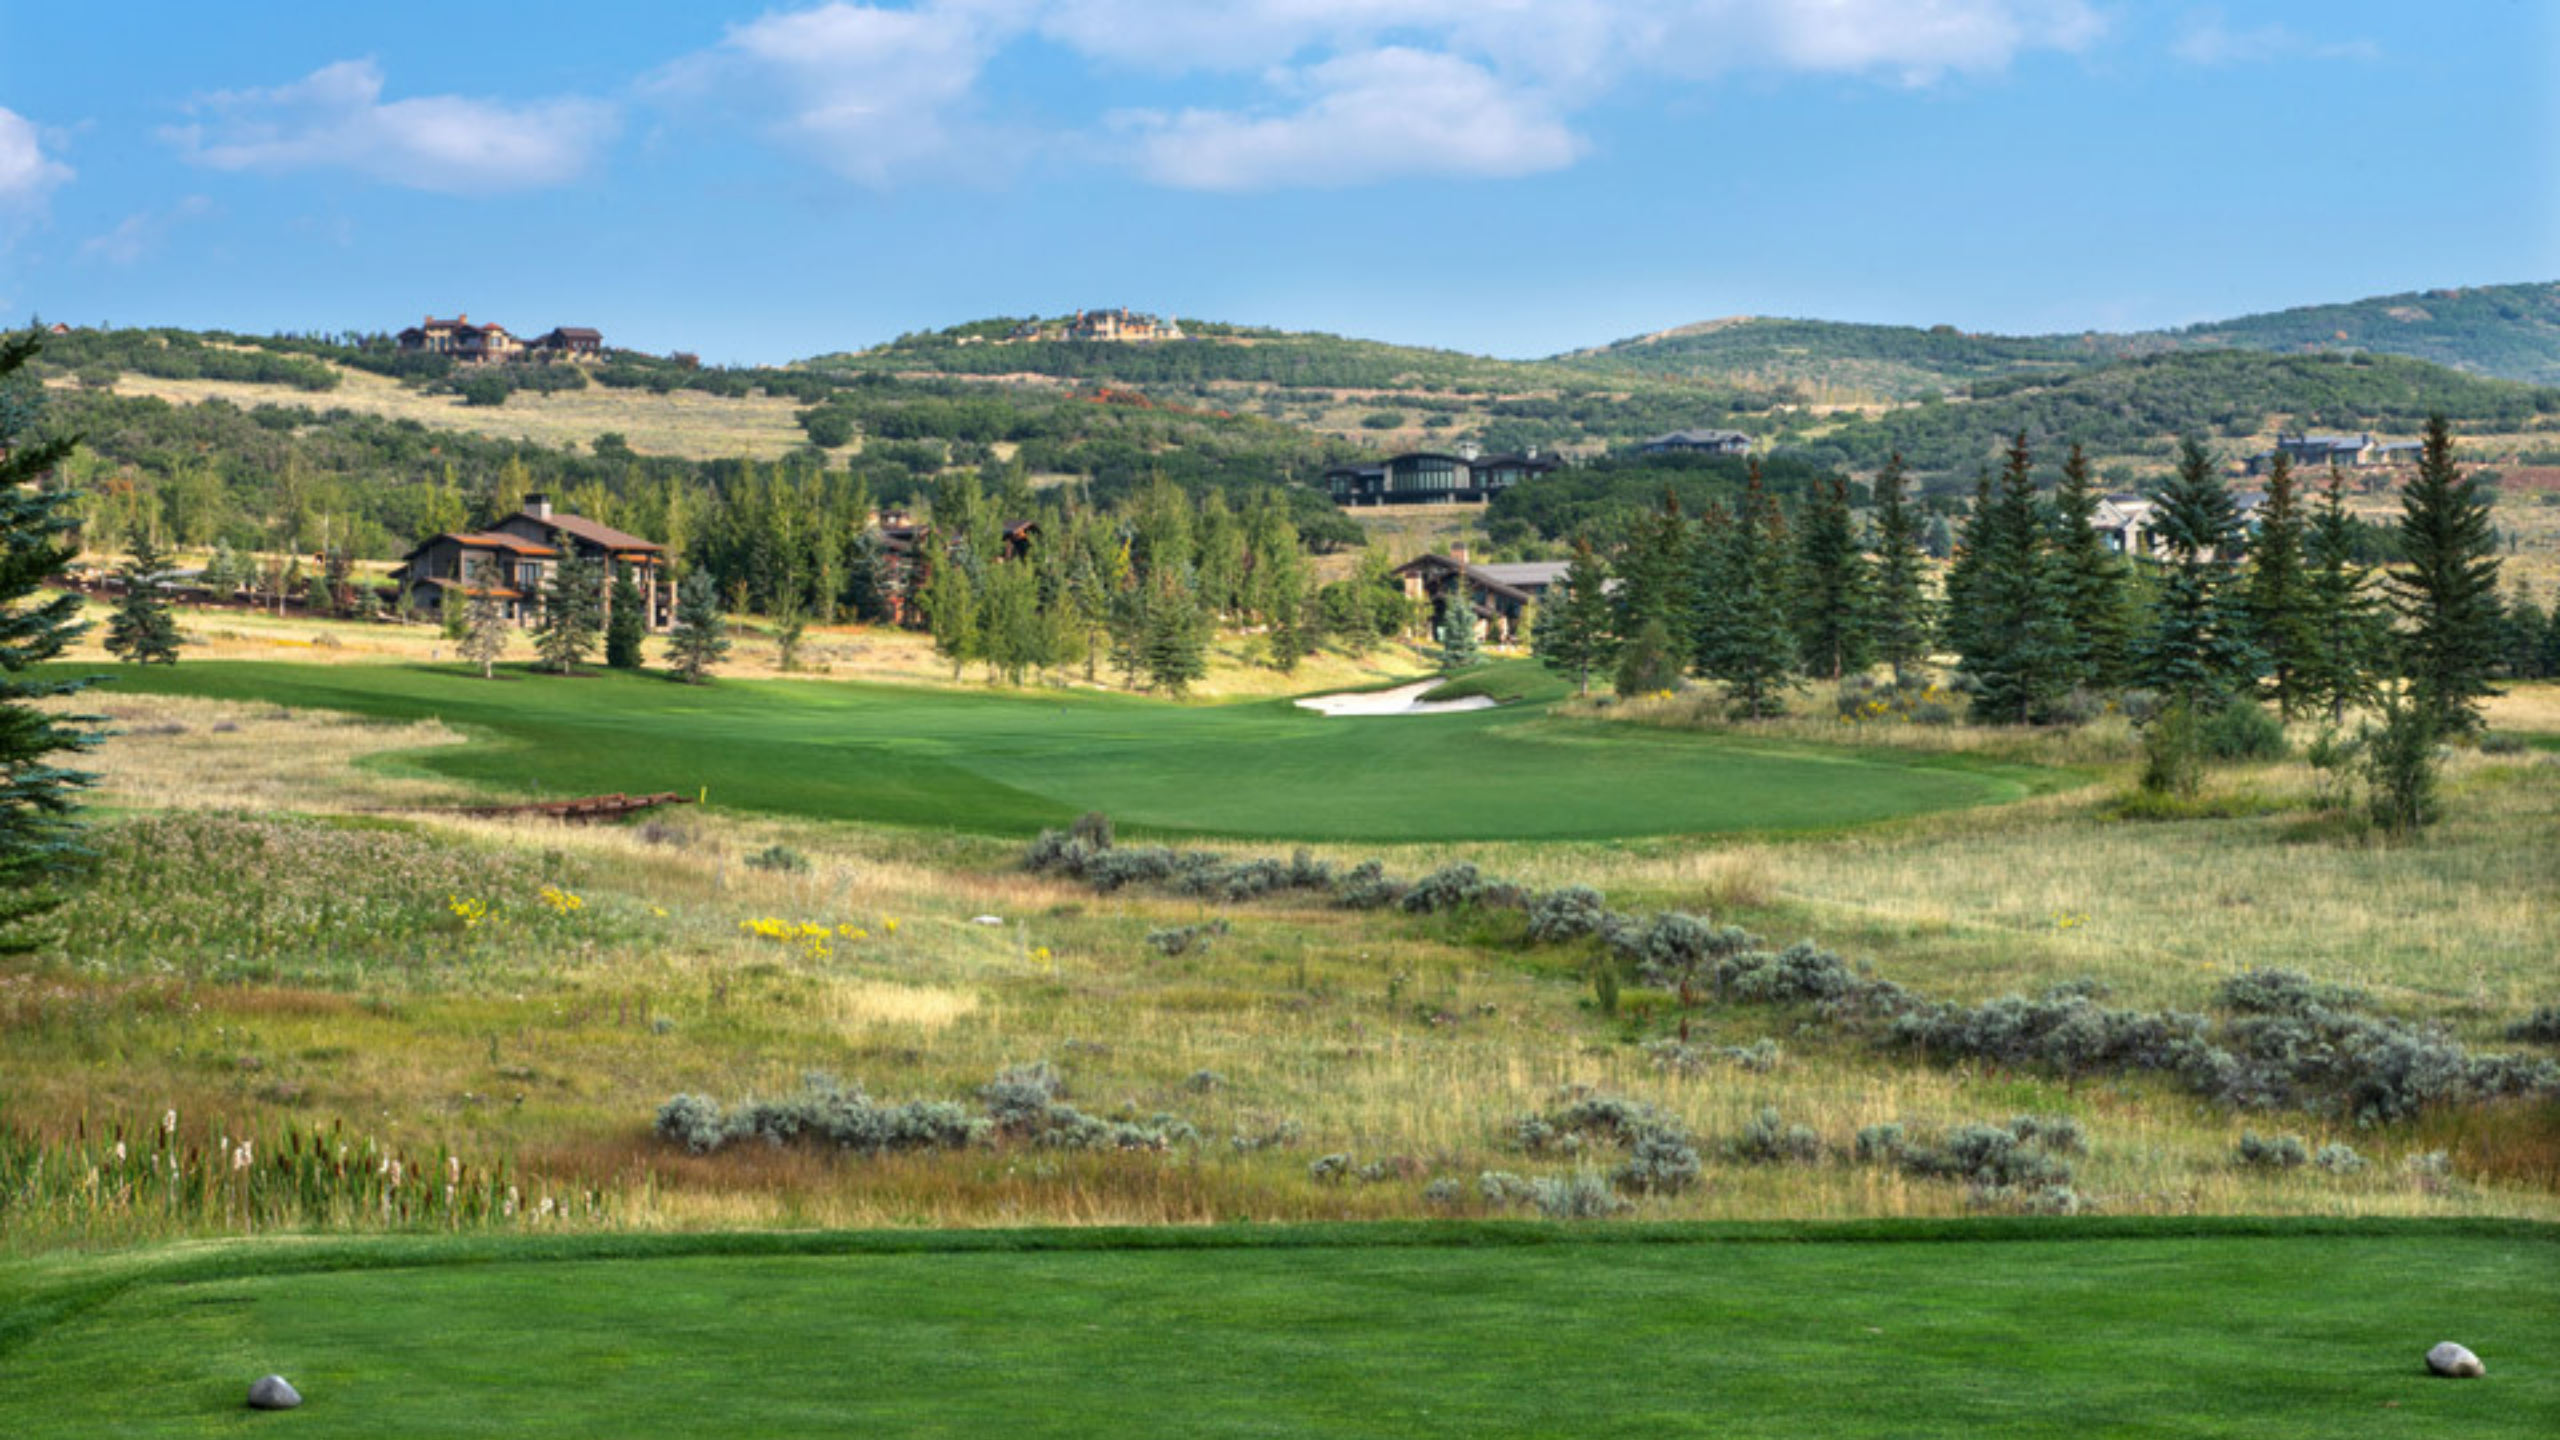 2021 Glenwild Golf Club and Spa Trends